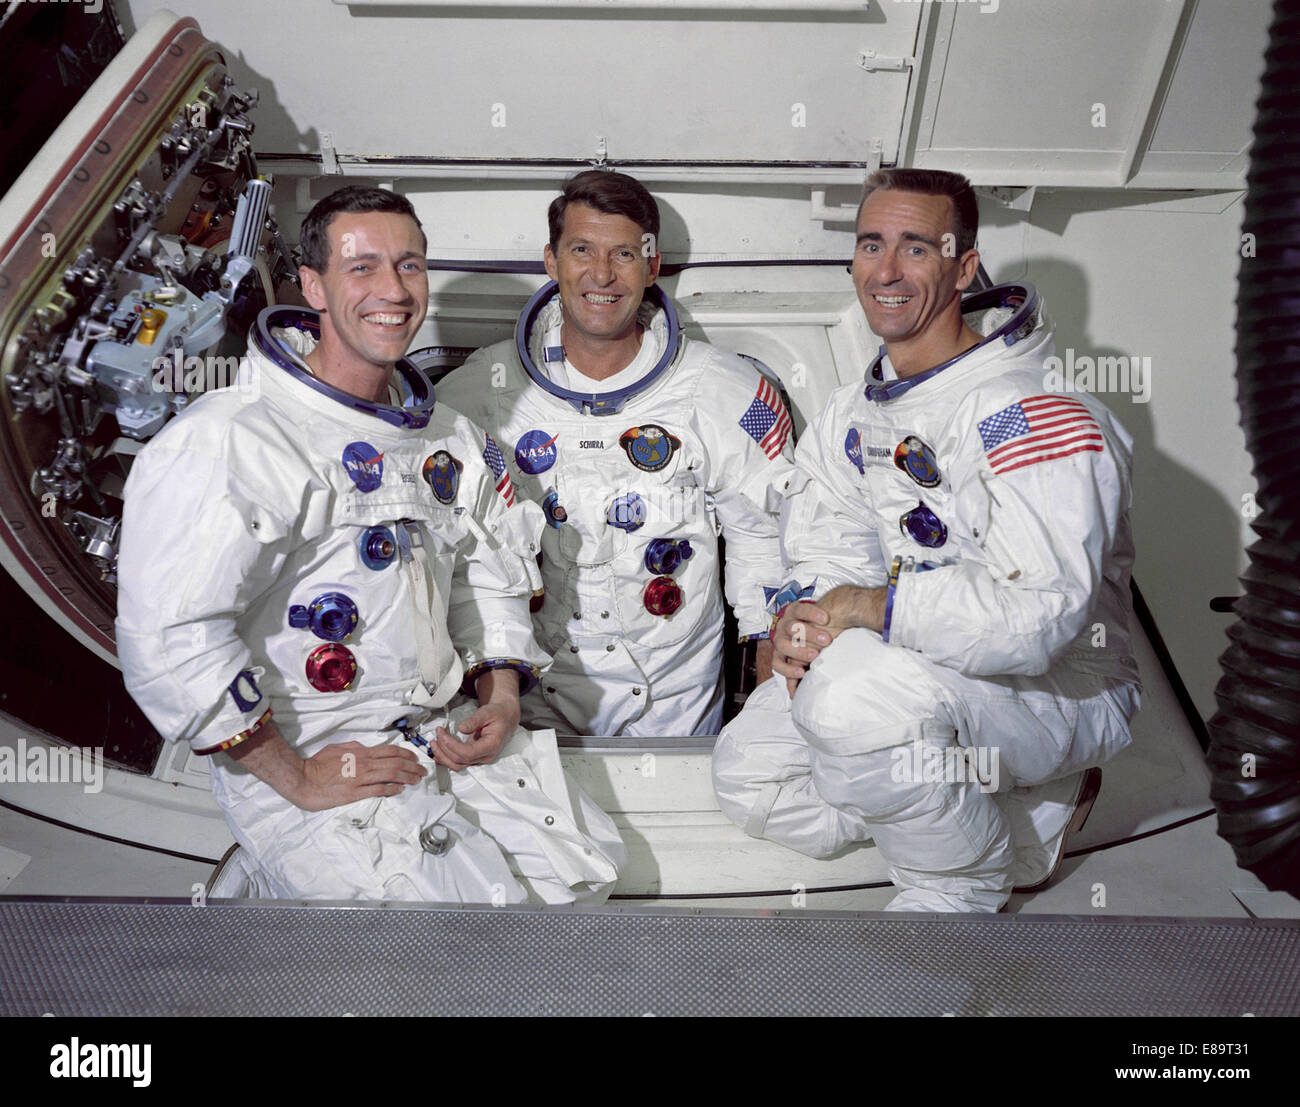 The prime crew of the first Apollo space mission from left to right are: Command Module pilot, Don F. Eisele, Commander, Walter M. Schirra Jr. and Lunar Module pilot, Walter Cunningham. The photograph was taken inside the White Room which is attached to the crew access arm. From here astronauts ingress and egress the spacecraft. Commander Wally Schirra Jr. is seen inside the opening of the Command Module's main hatch.  Image # : S68-33744 Date: May 22, 1968 Stock Photo